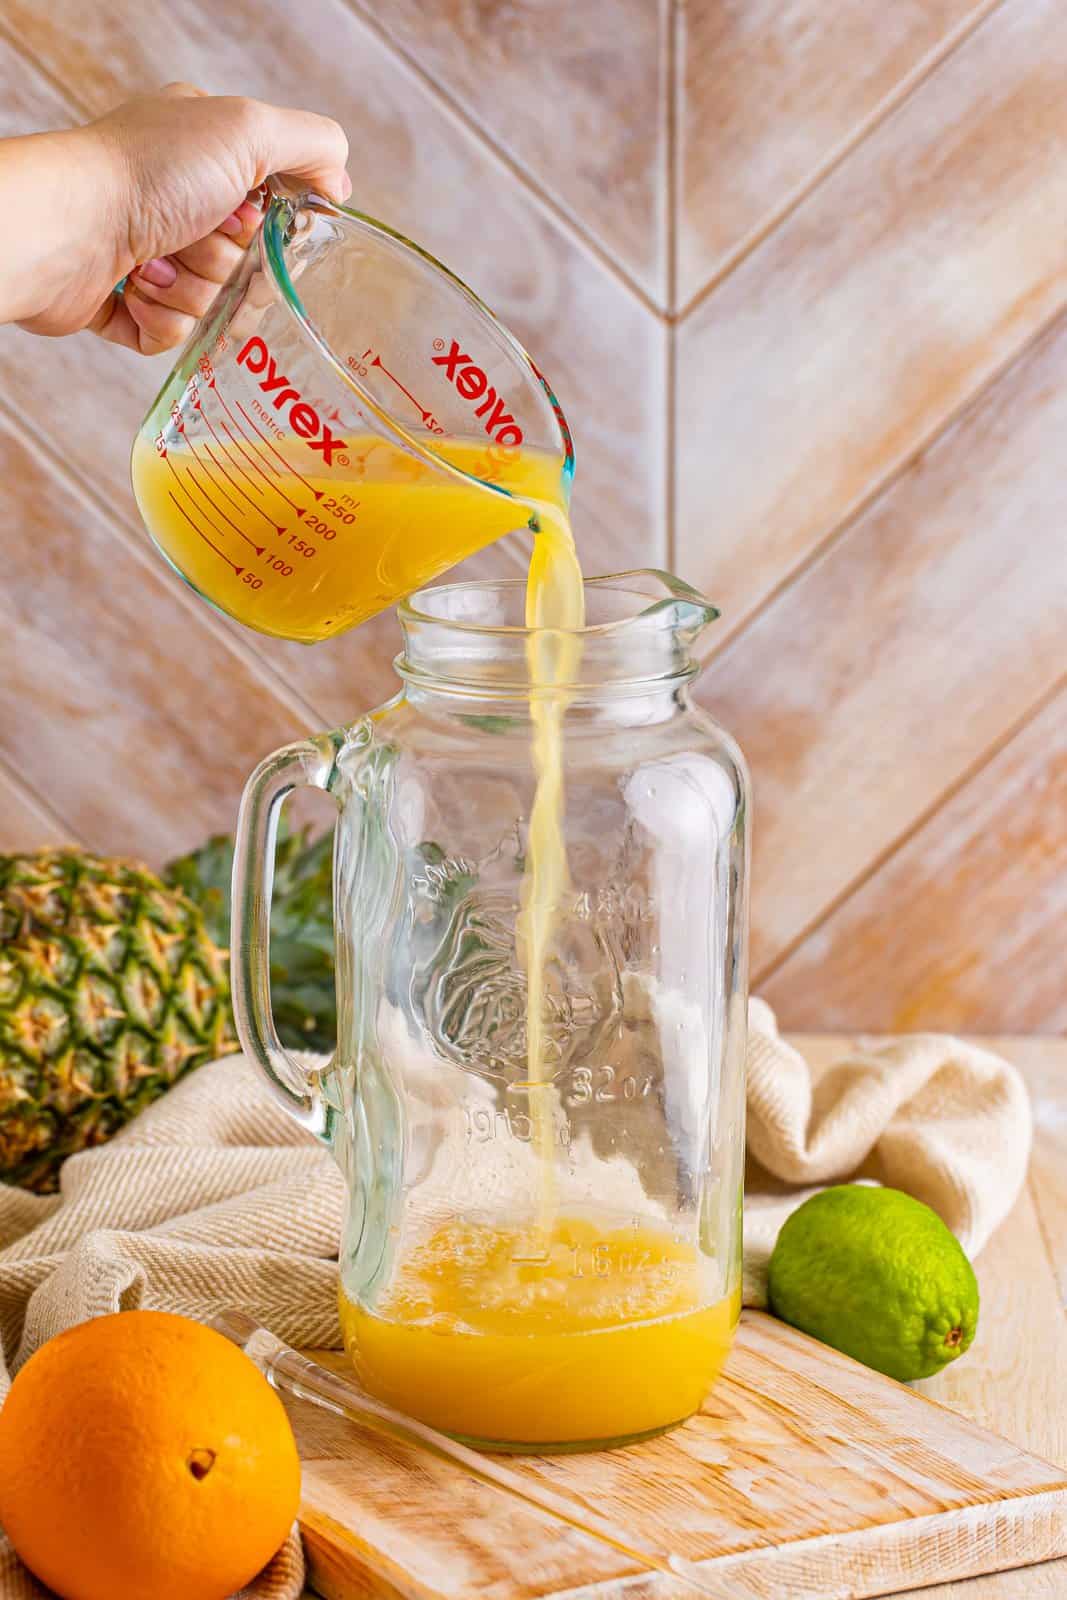 A pitcher with pineapple and orange juice.